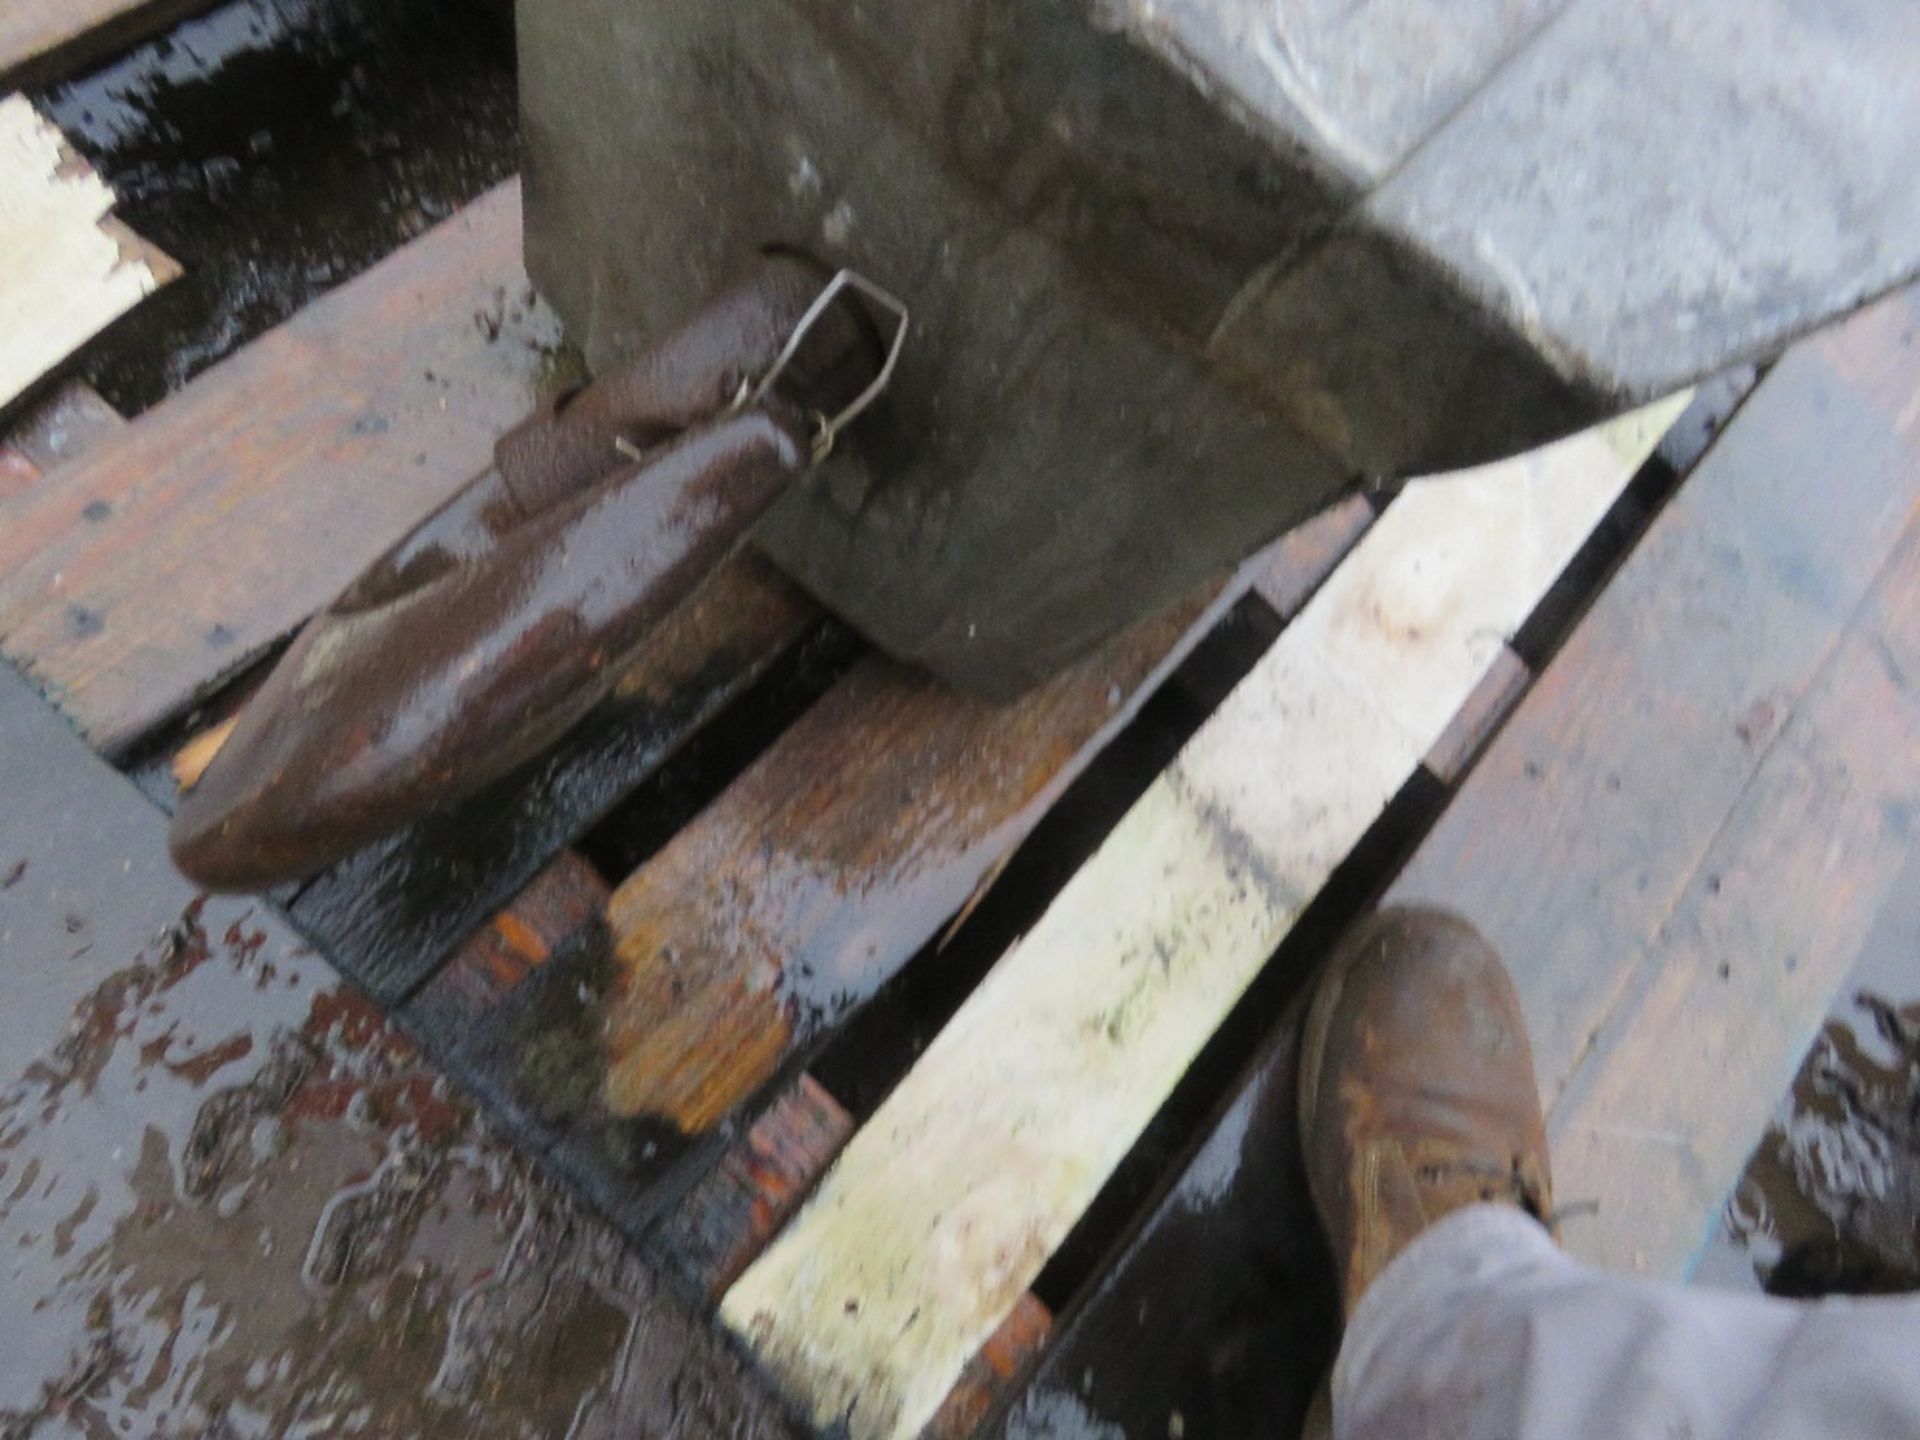 SET OF LARGE SALTER CRANE SCALES, 5 TONNE RATED. THIS LOT IS SOLD UNDER THE AUCTIONEERS MARGIN SC - Image 2 of 3